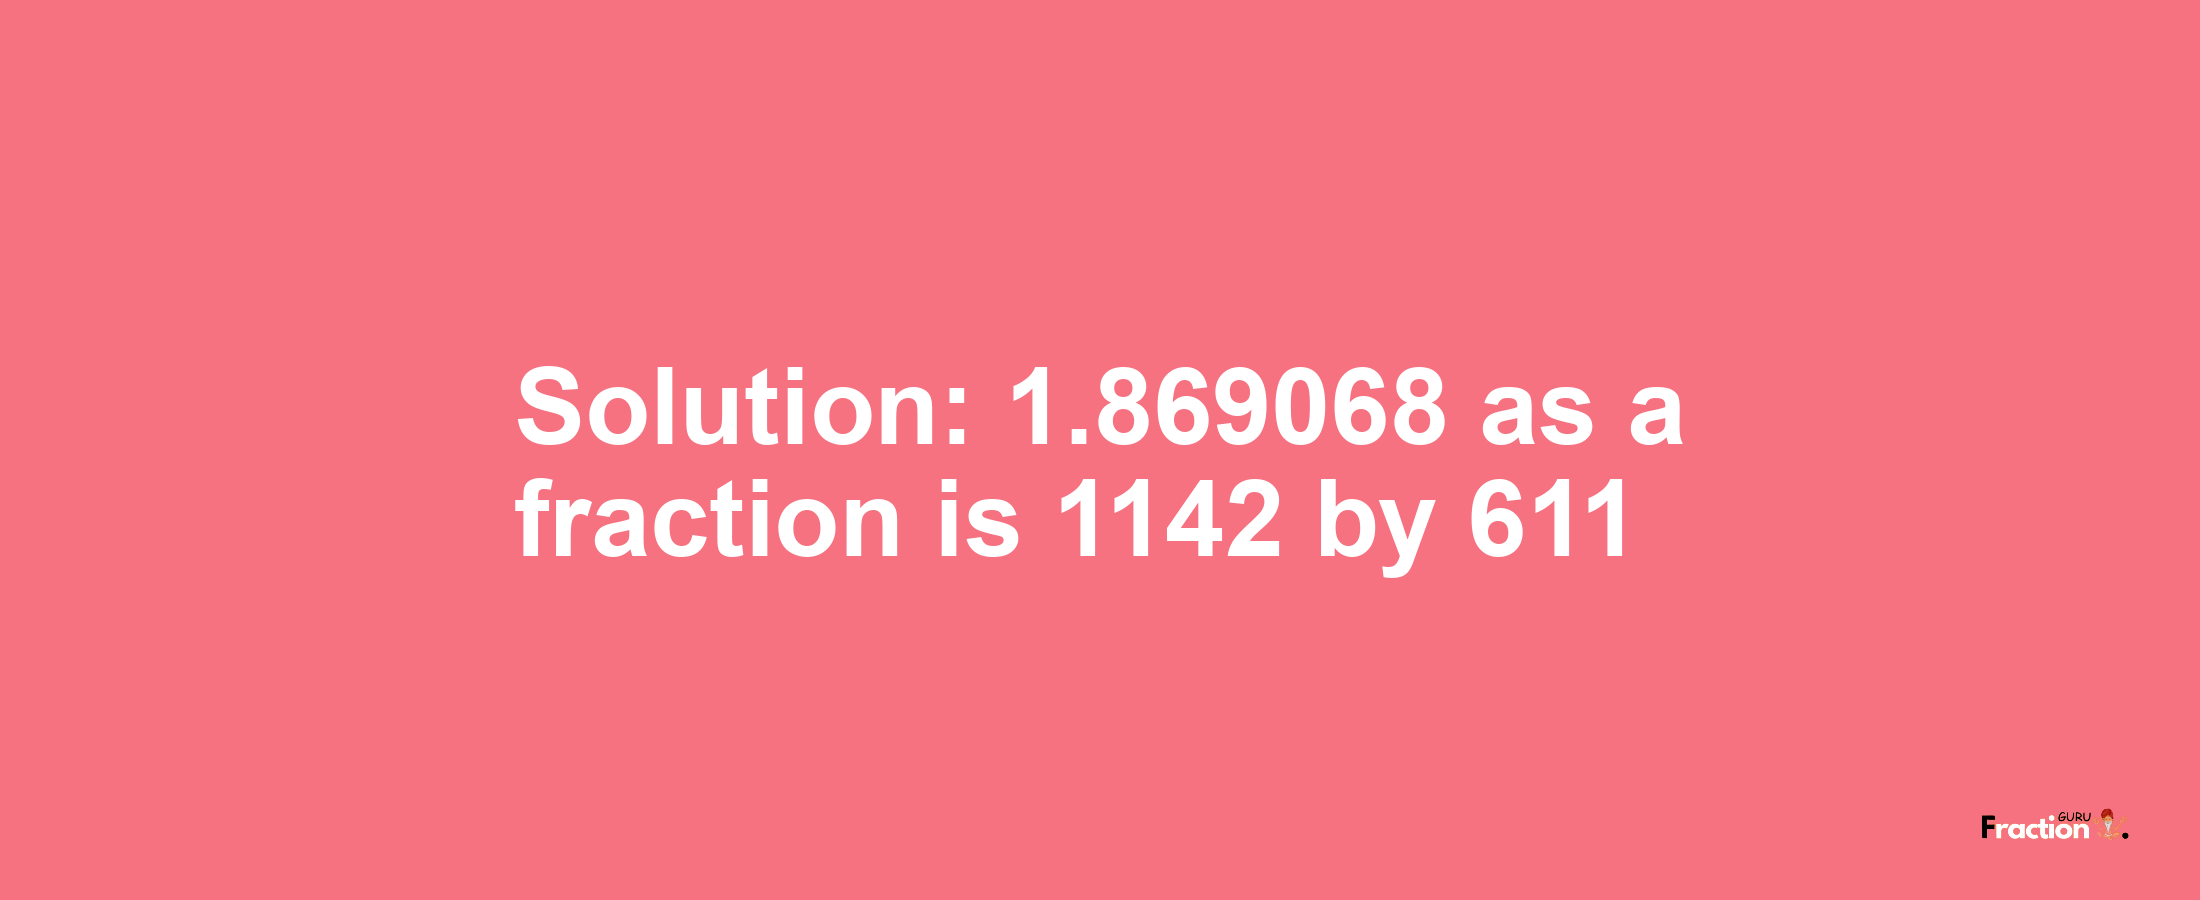 Solution:1.869068 as a fraction is 1142/611